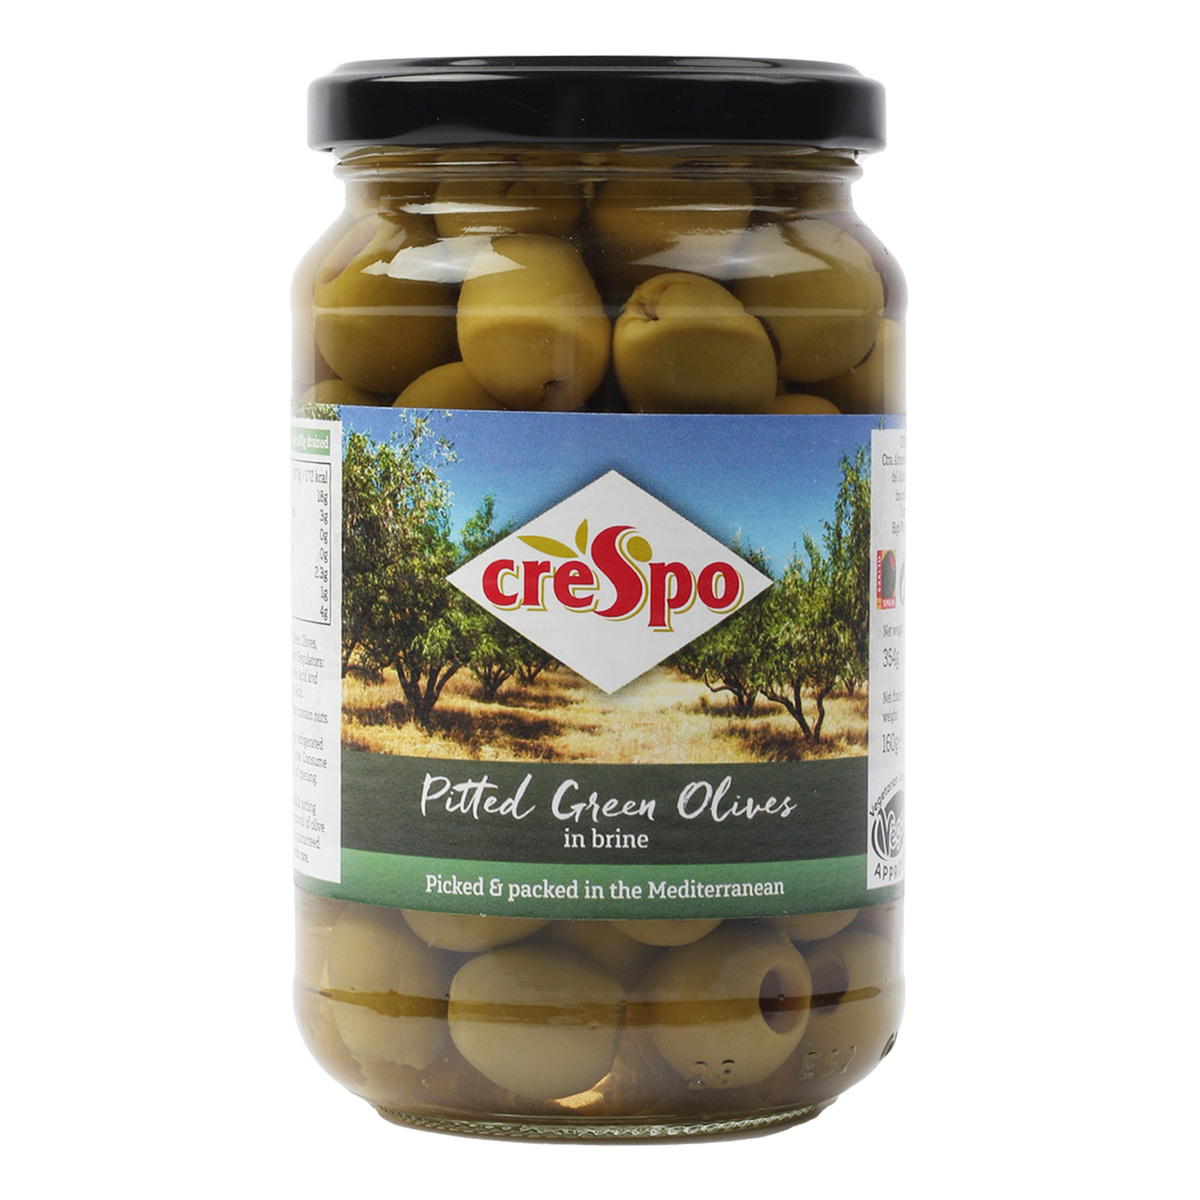 Crespo Pitted Green Olives 354 g